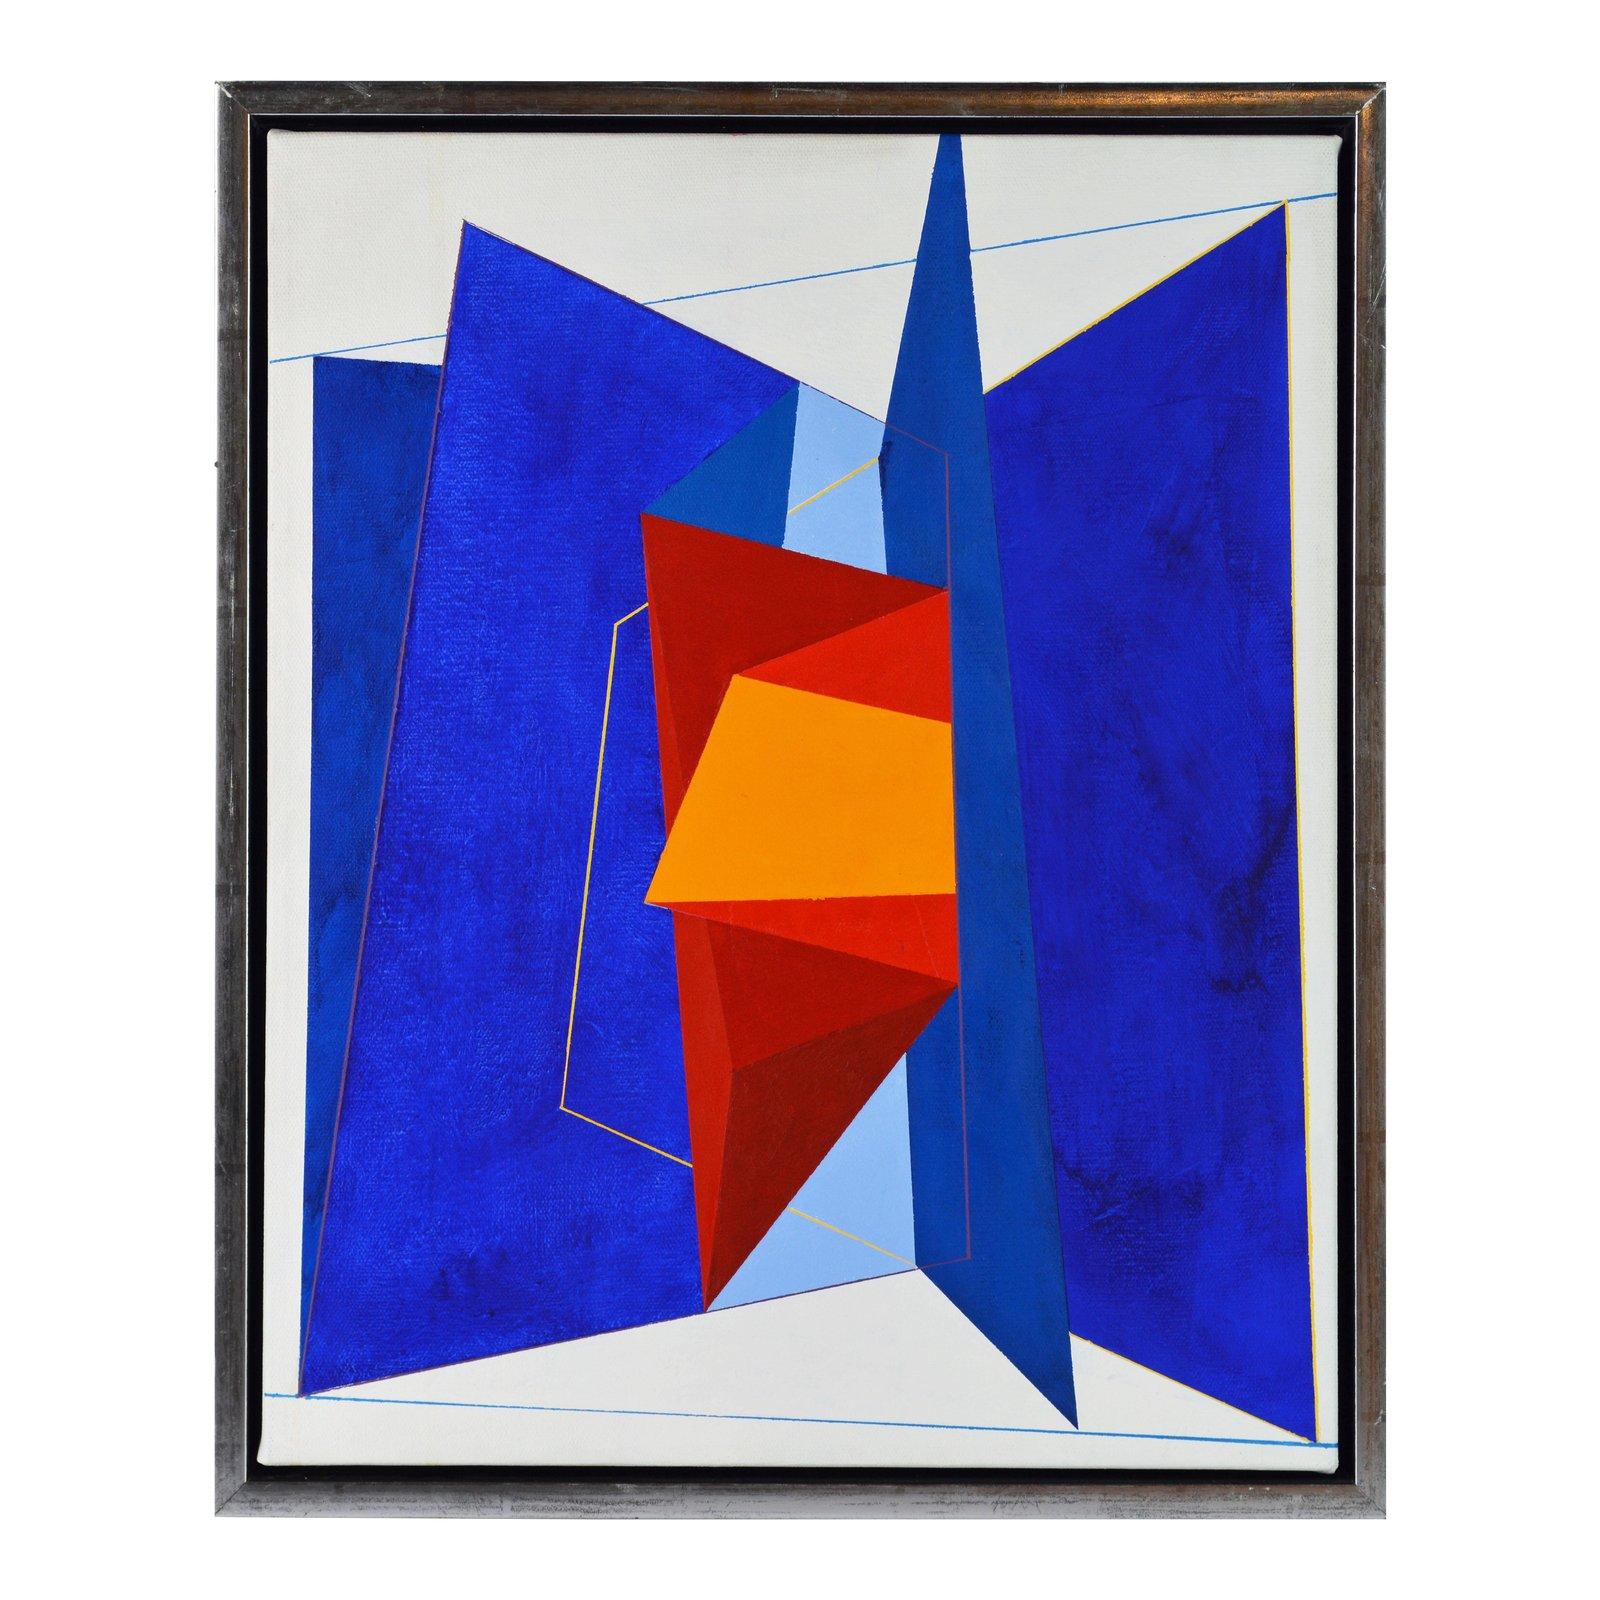 'Color Composition'
by Anders Hegelund, Danish b. 1938.
Acrylic on canvas. Measures: 15.75 x 19.75 in. without frame, 17 x 21 in. including frame, signed, dated and inscribed on the back.
Housed in a Minimalist style silver finish floater